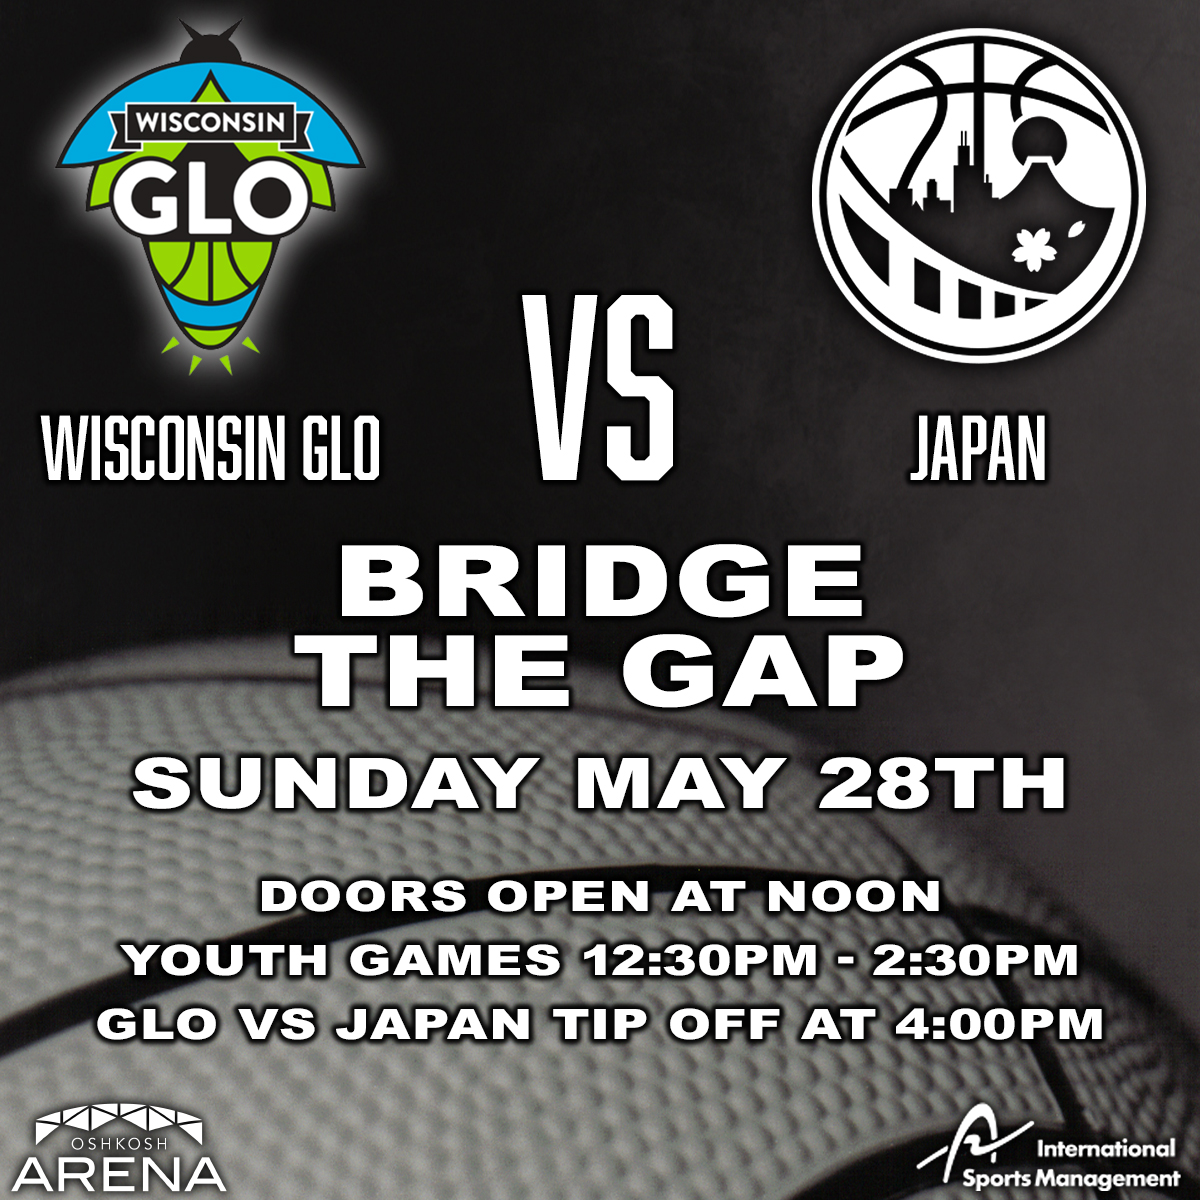 📢Surprise Announcement📢
Bridge The Gap!
Wisconsin GLO vs. Japan
Sunday May 28th
Doors open at Noon
Youth Games 12:30pm-2:30pm
Tipoff at 4:00pm
1212 S. Main St. Oshkosh
Come hangout with us Memorial Day Weekend!
#oshkosh #letsglo #womensbasketball 💚🏀
bit.ly/41vnS1a